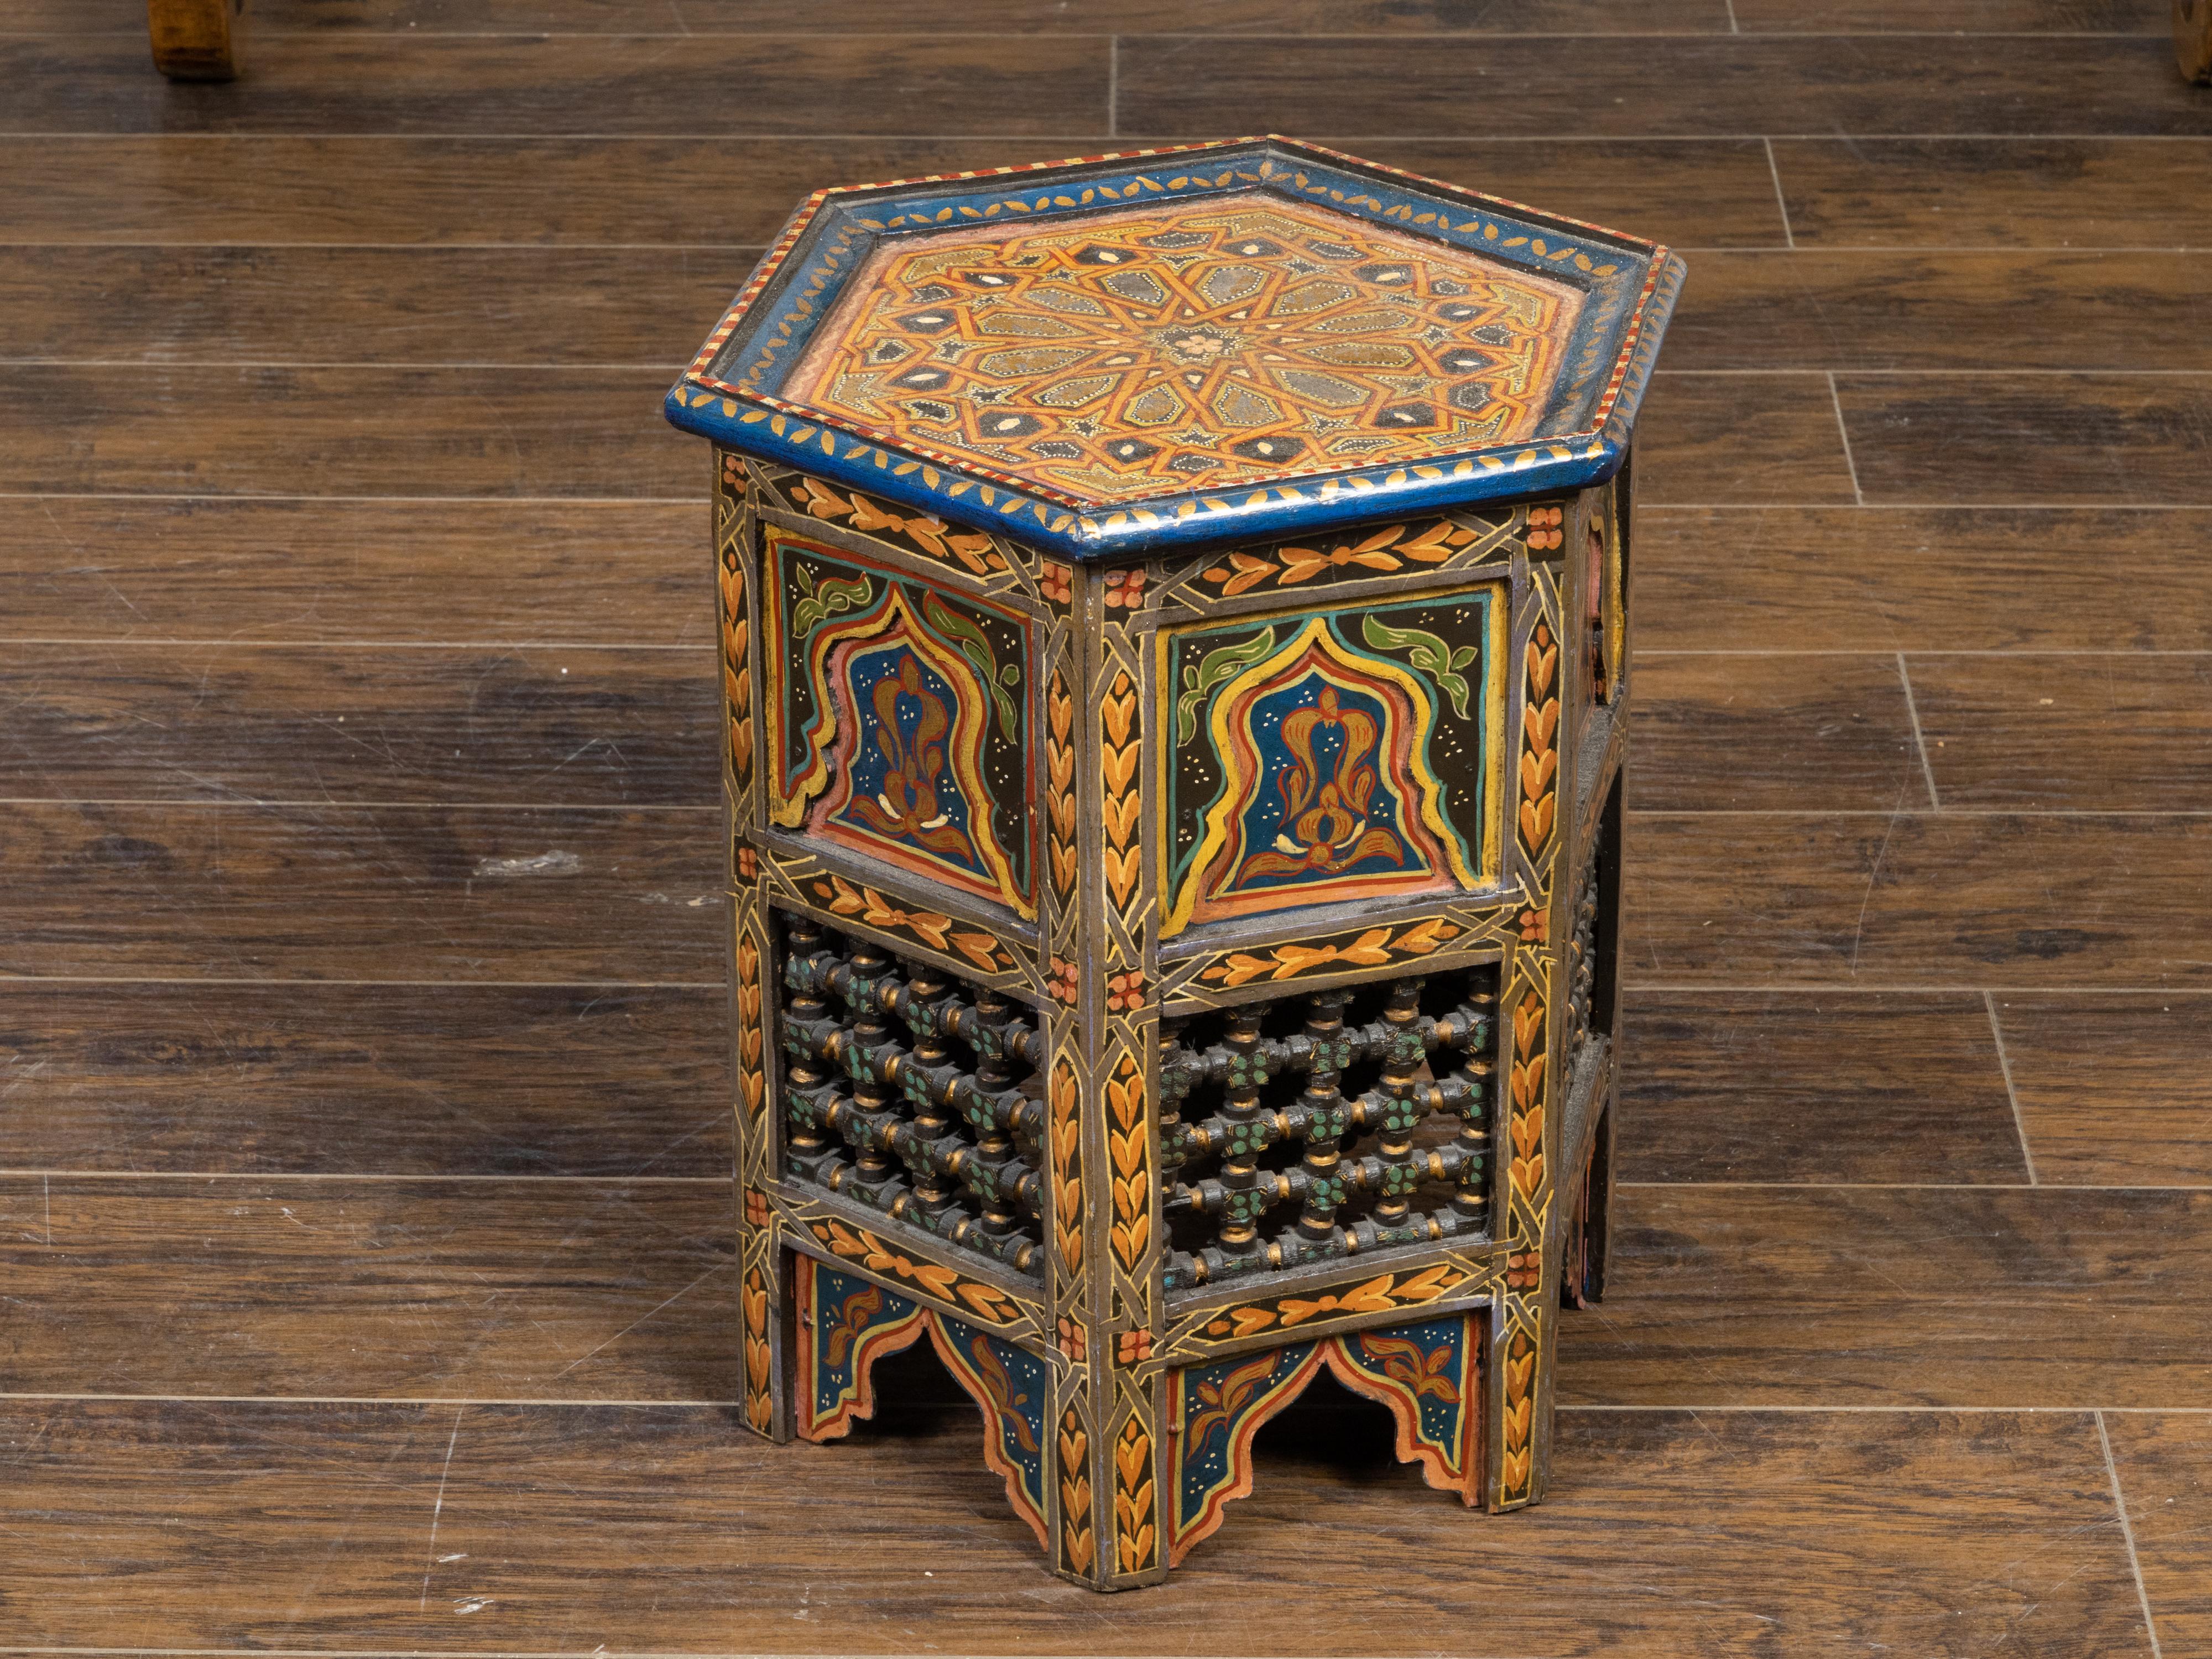 A Moroccan Moorish style drinks table from the early 20th century, with painted geometric motifs, hexagonal top, polychrome décor and carved pierced motifs. Created in Morocco during the first quarter of the 20th century, this petite side table